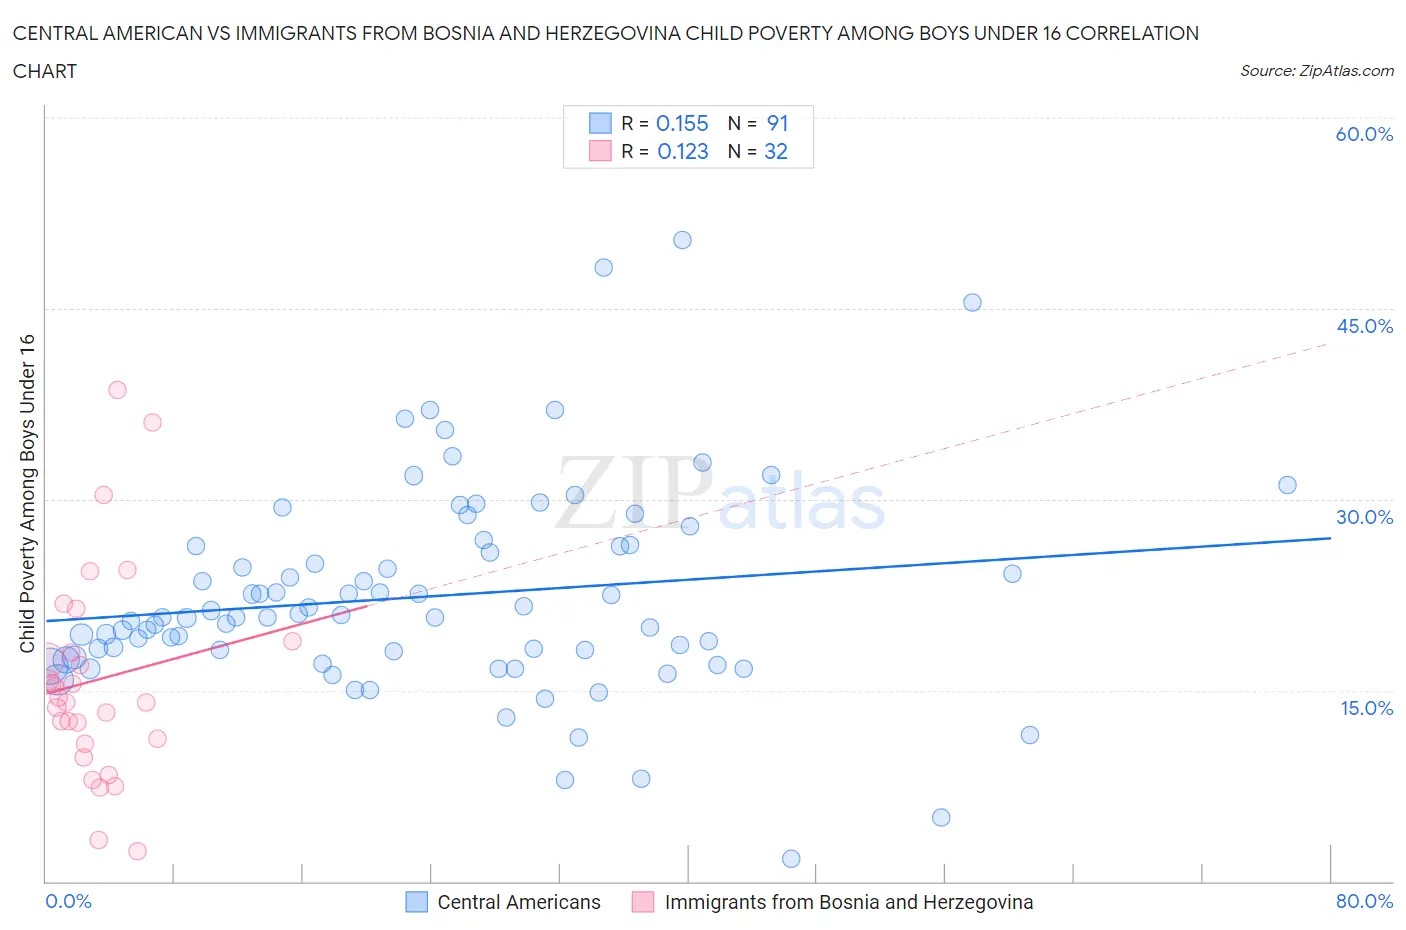 Central American vs Immigrants from Bosnia and Herzegovina Child Poverty Among Boys Under 16